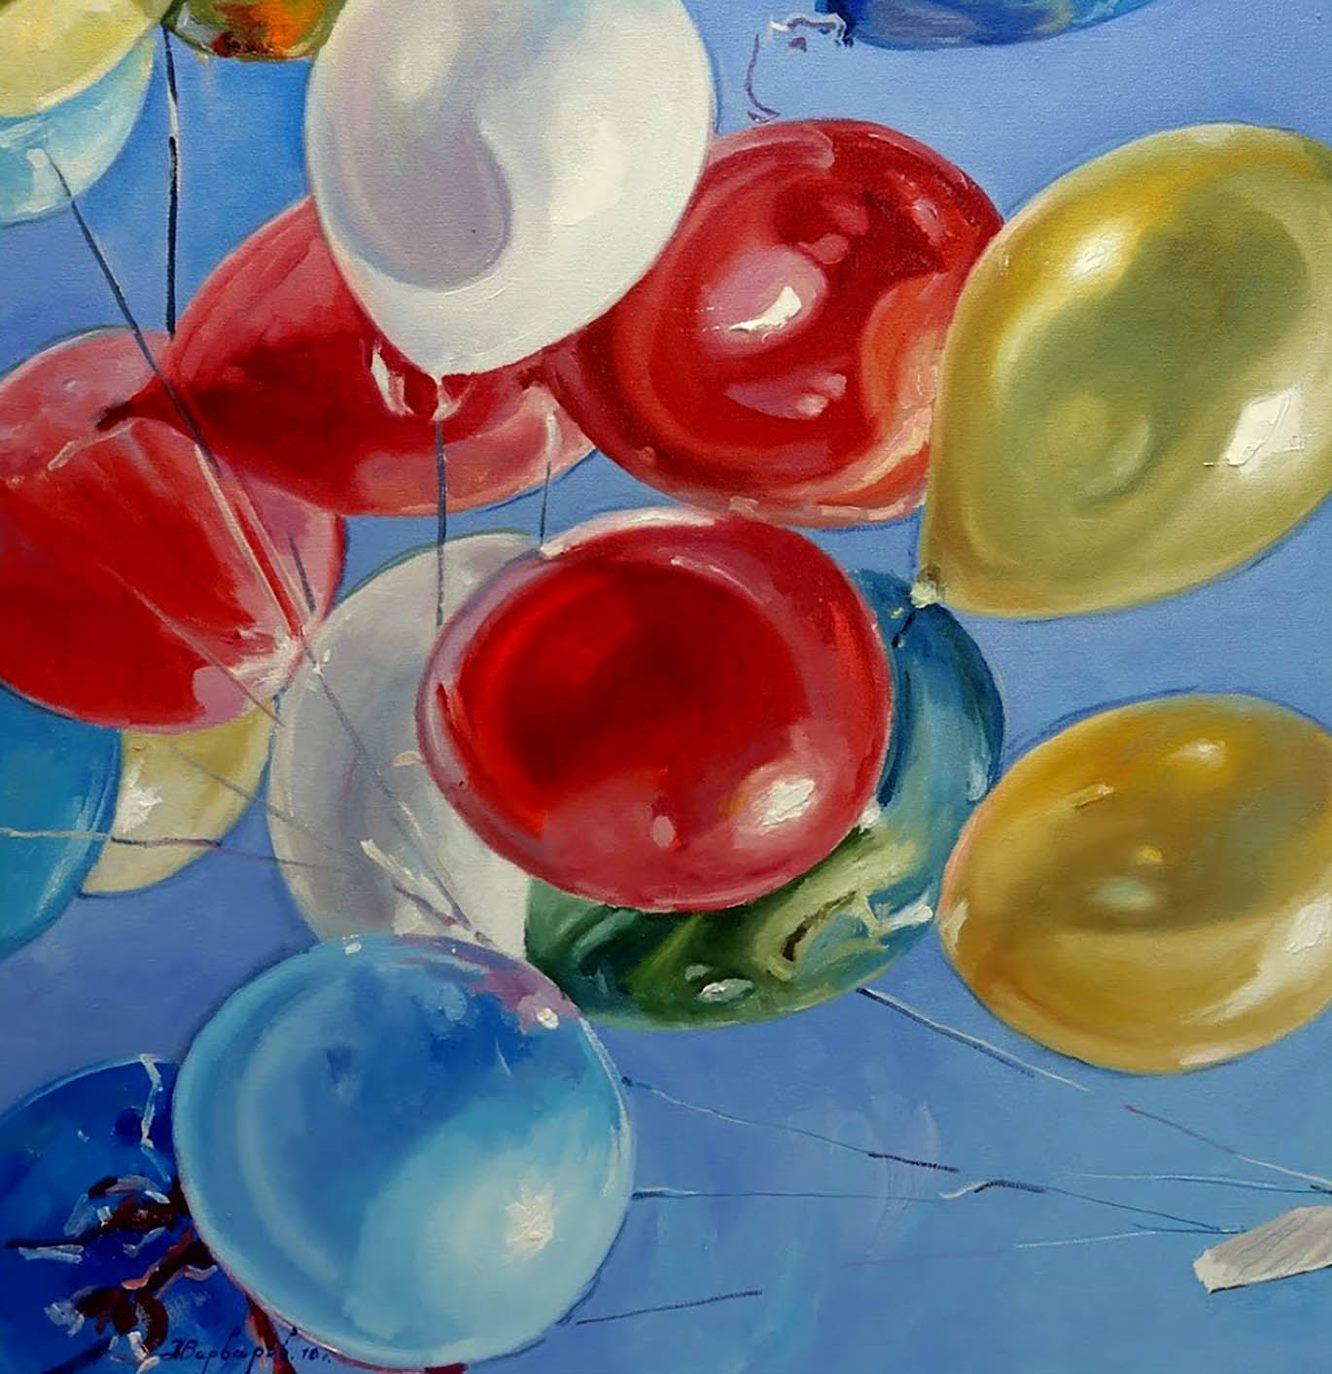 Carrier, Balloons, Canvas Art, Original oil Painting, One of a Kind - Blue Landscape Painting by Anatoly Varvarov Viktorovich